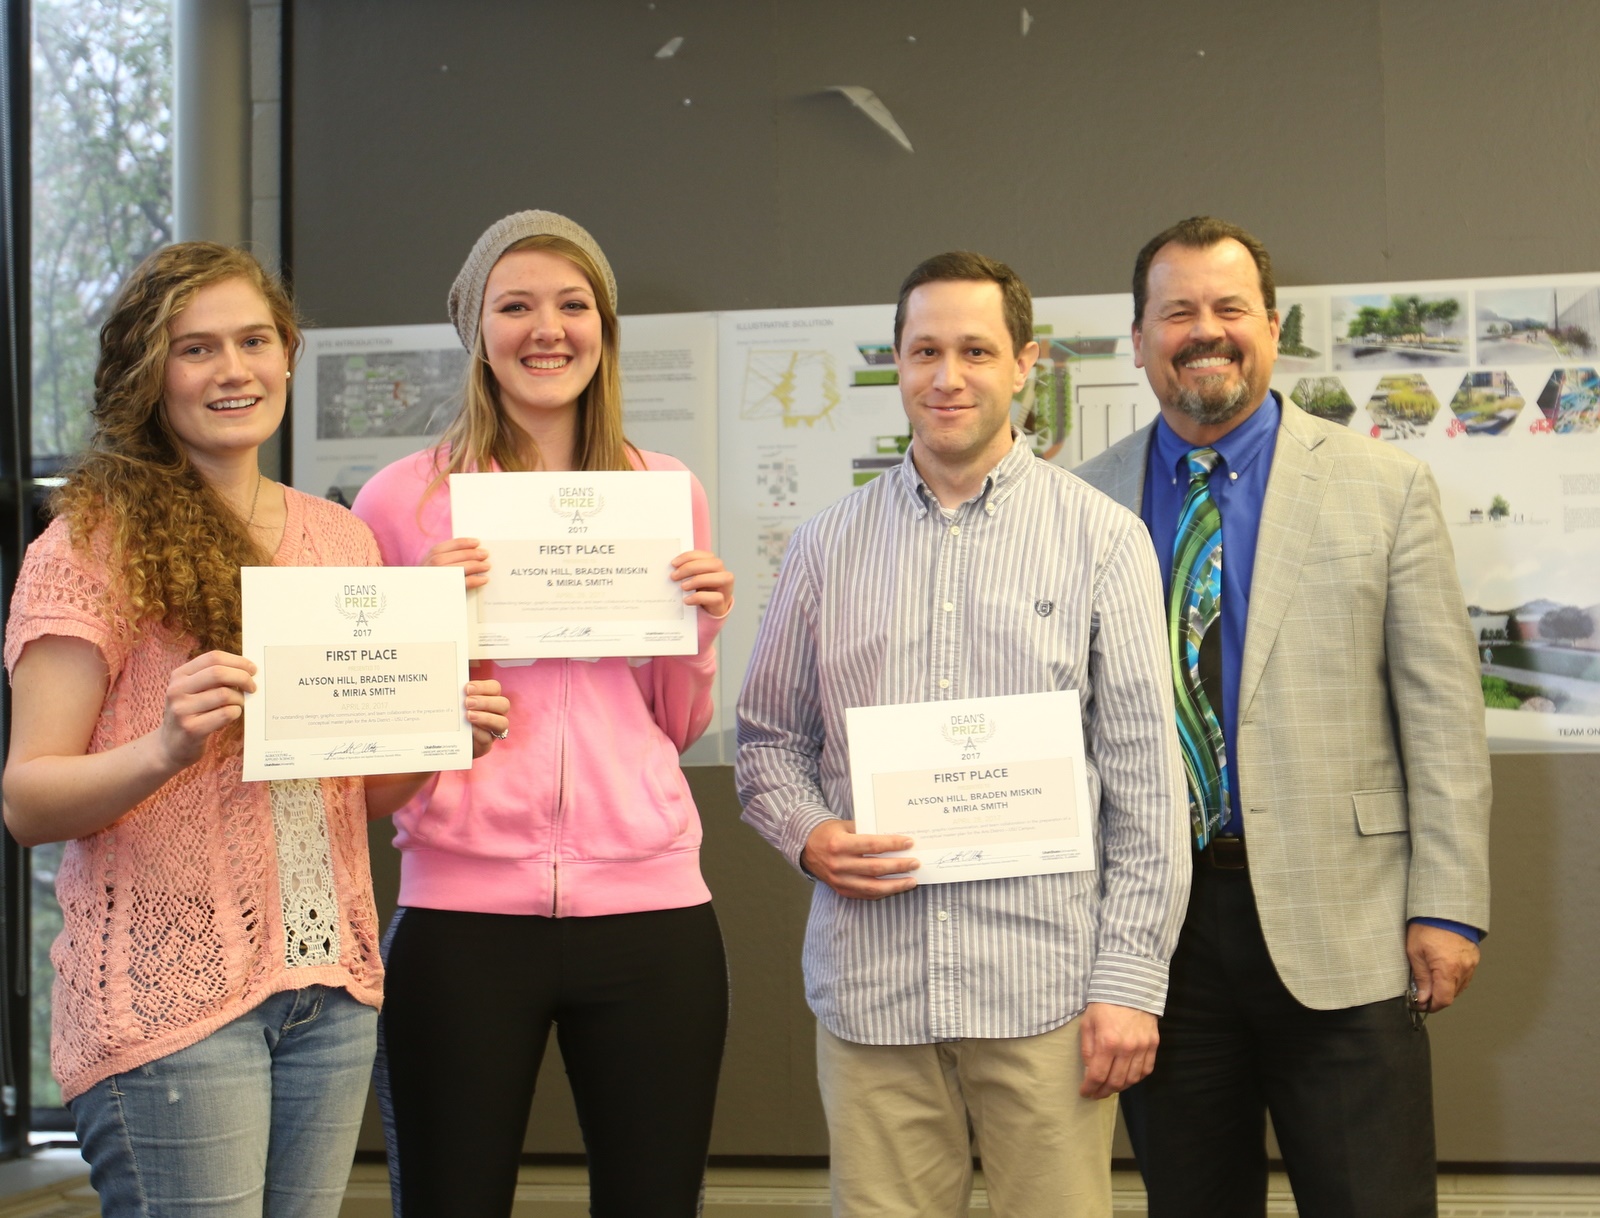 USU LAEP Students Receive Dean's Prize for Redesign Project